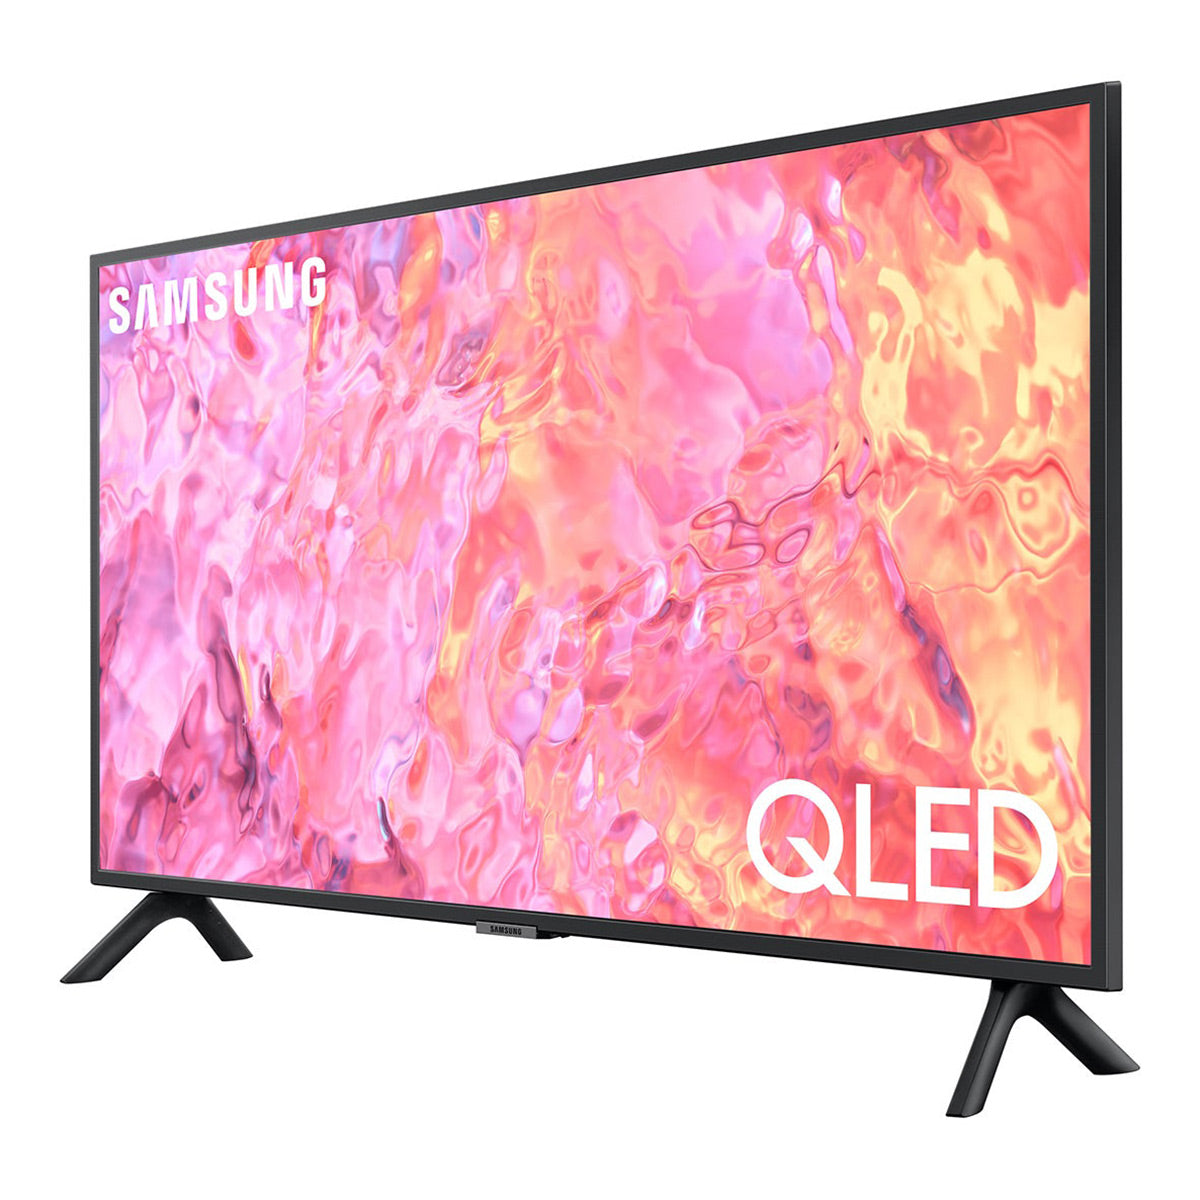 Samsung QN43Q60CA 43" QLED 4K Smart TV with Quantum HDR, 100% Color Volume, Dual LED Backlights, & Object Tracking Sound (2023)